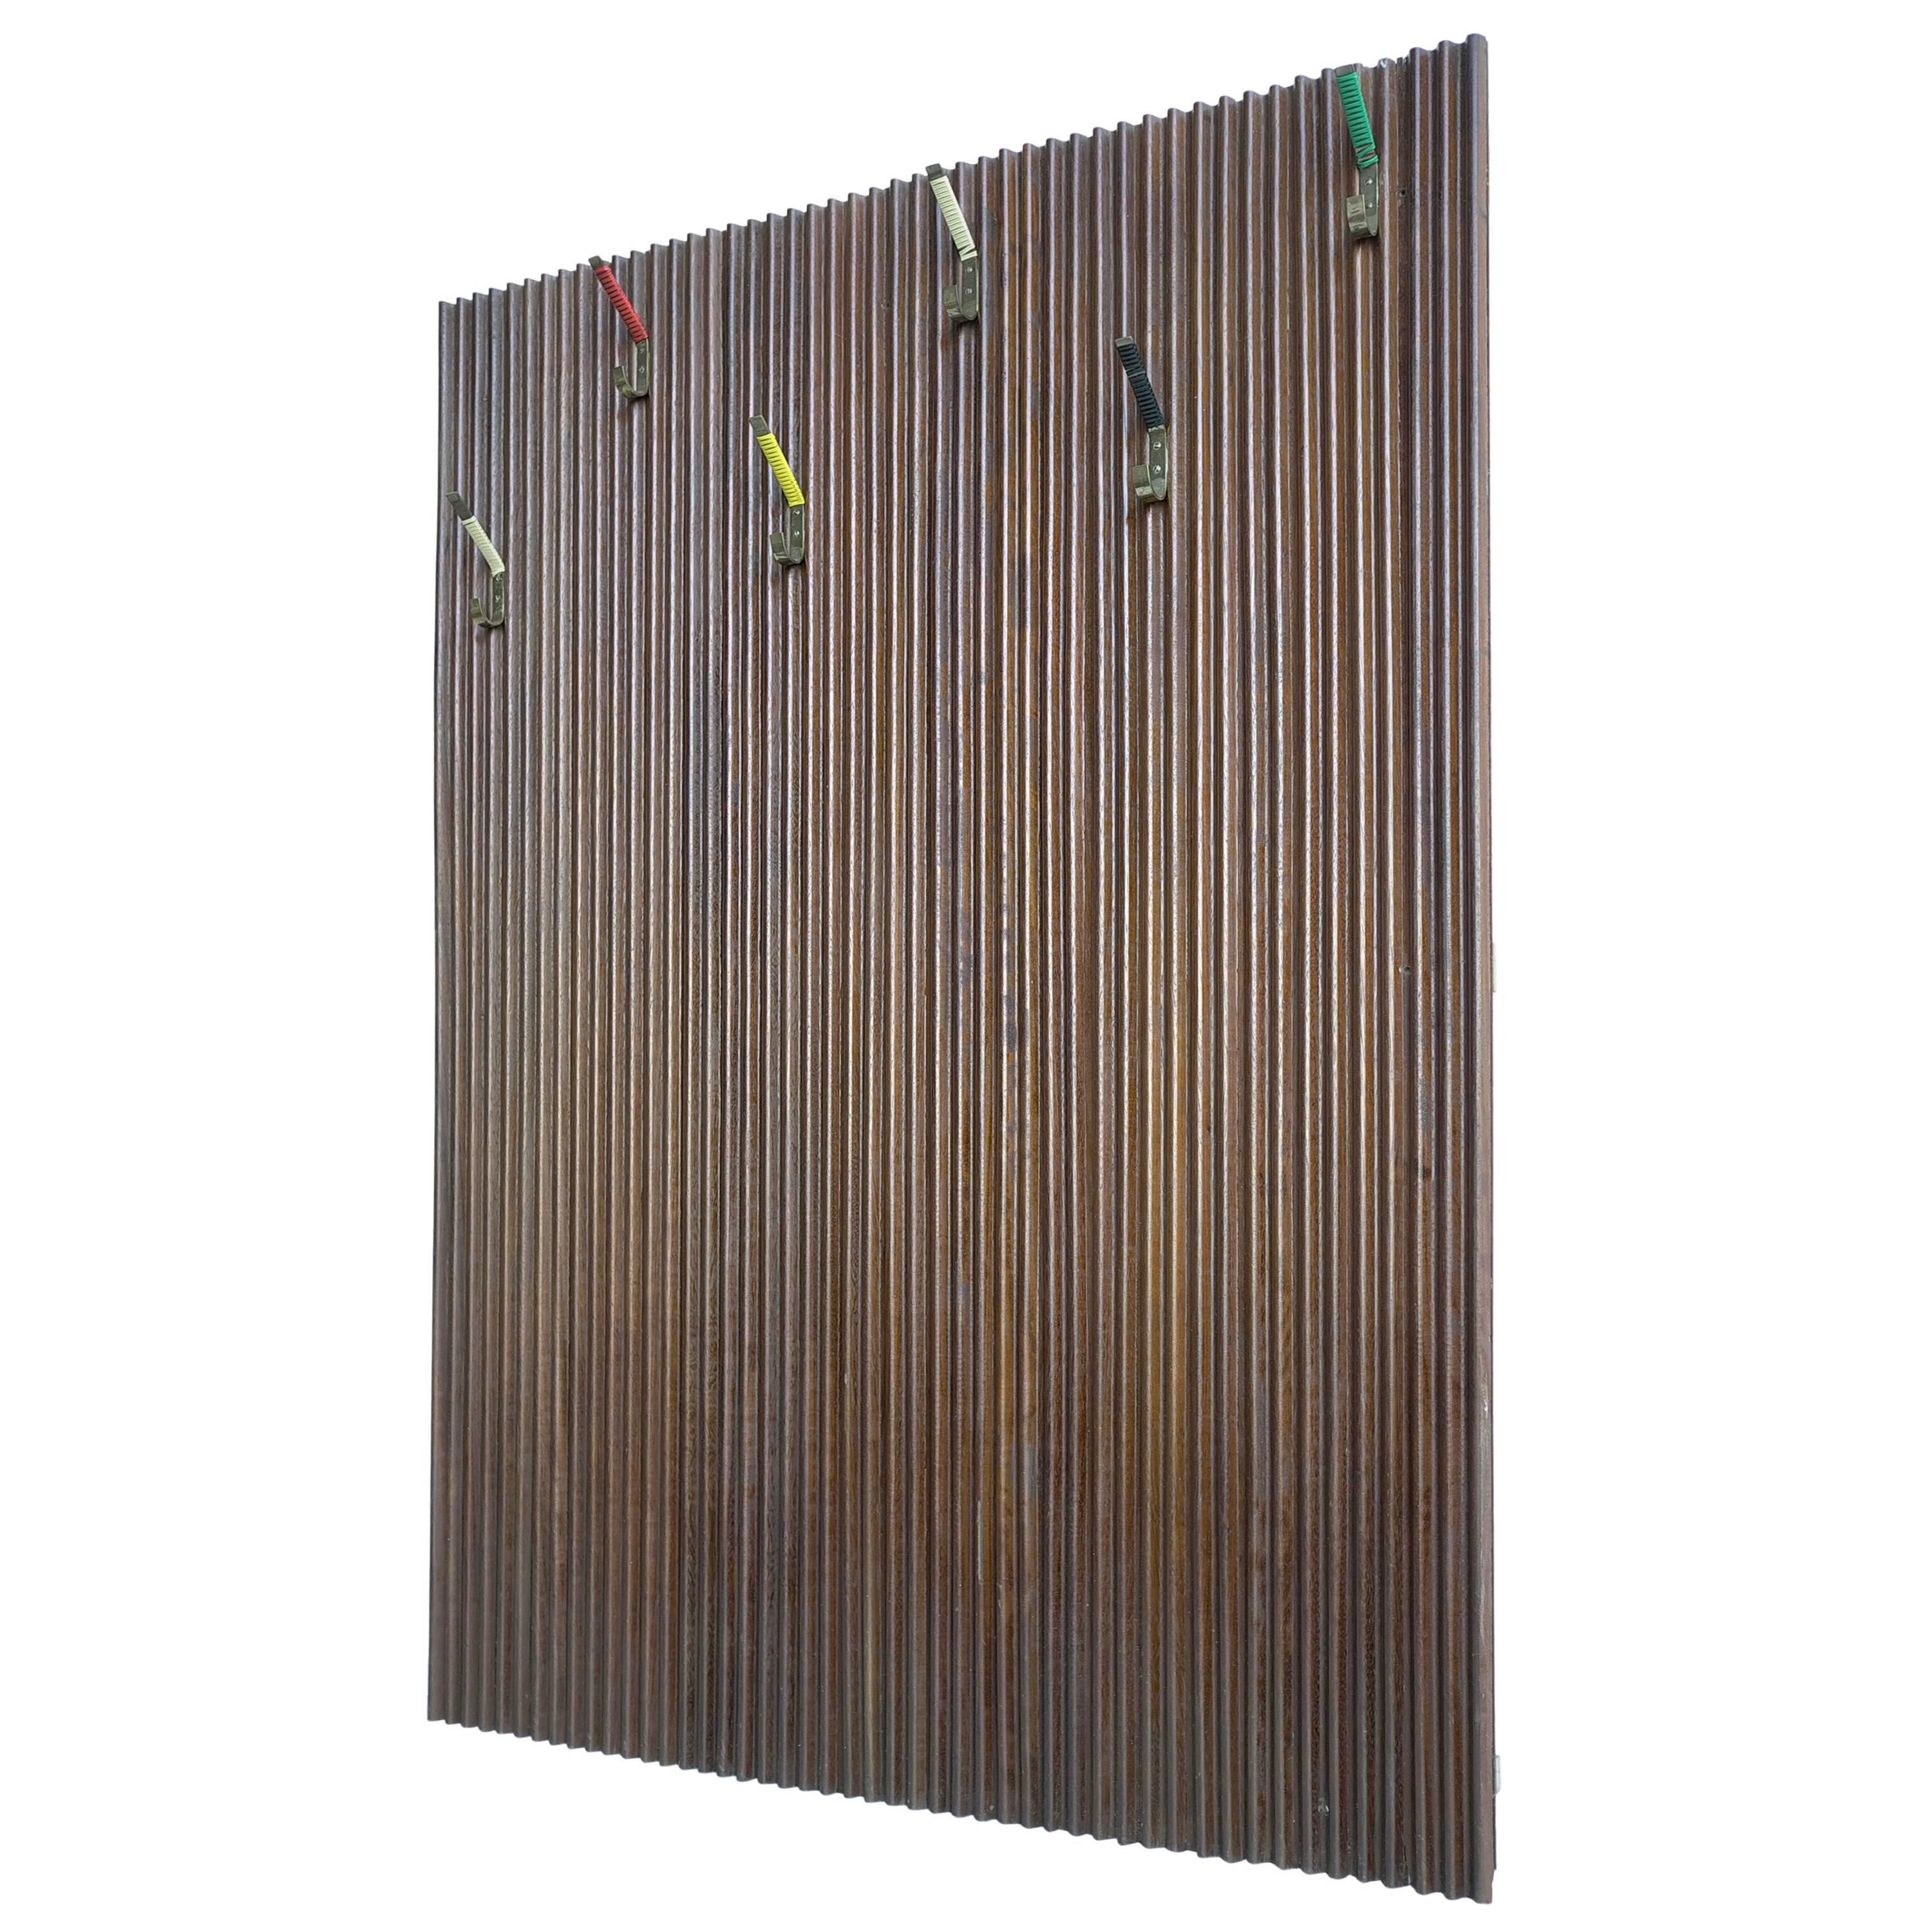 Large Italian Wall-Mounted Coat Rack with Colored Hooks in Brass